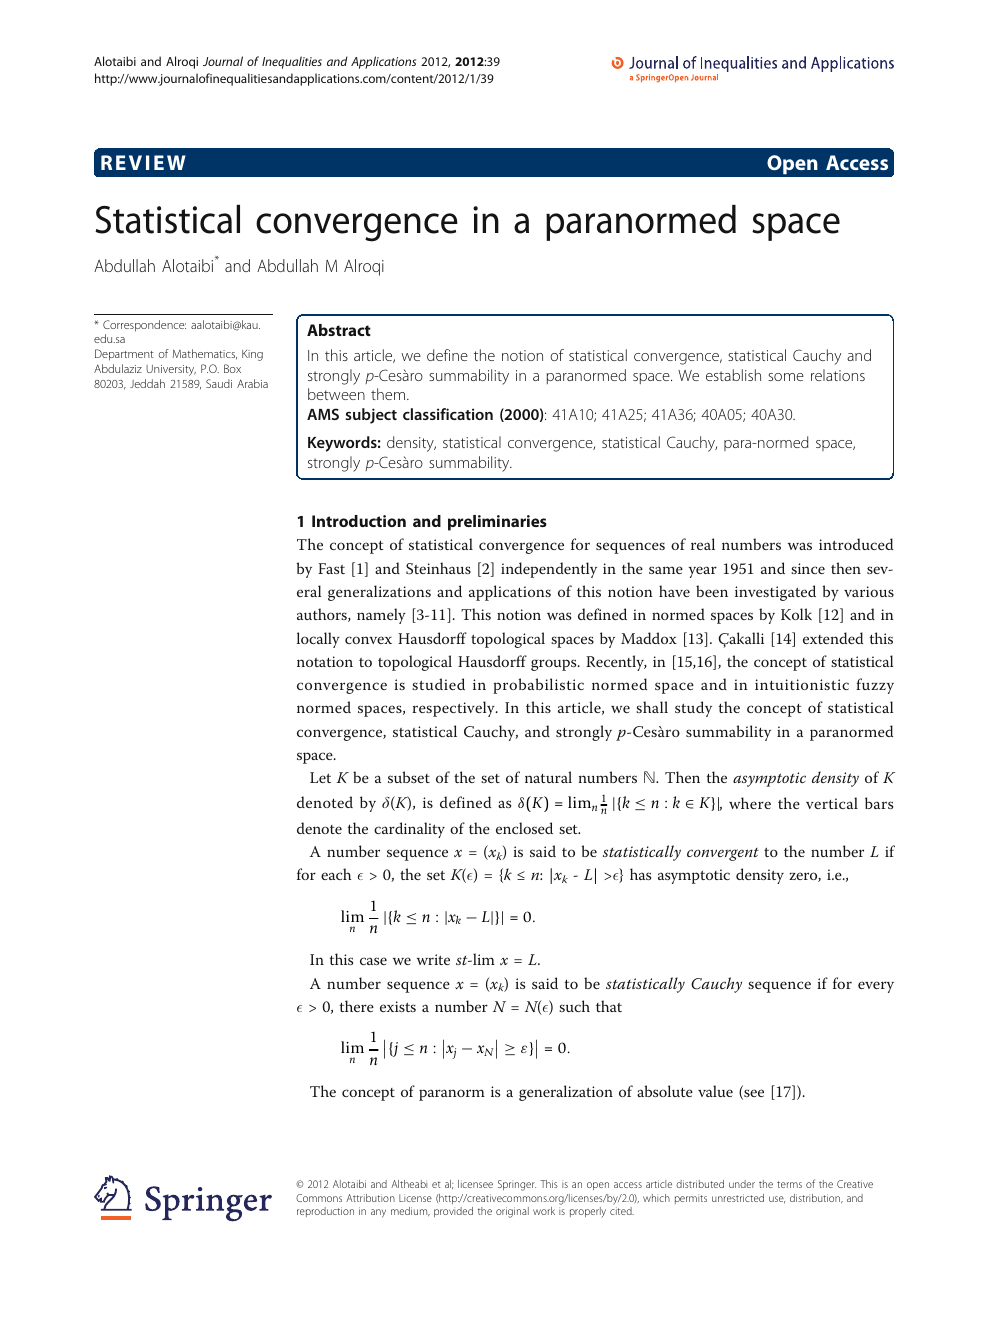 Statistical Convergence In A Paranormed Space Topic Of Research Paper In Mathematics Download Scholarly Article Pdf And Read For Free On Cyberleninka Open Science Hub